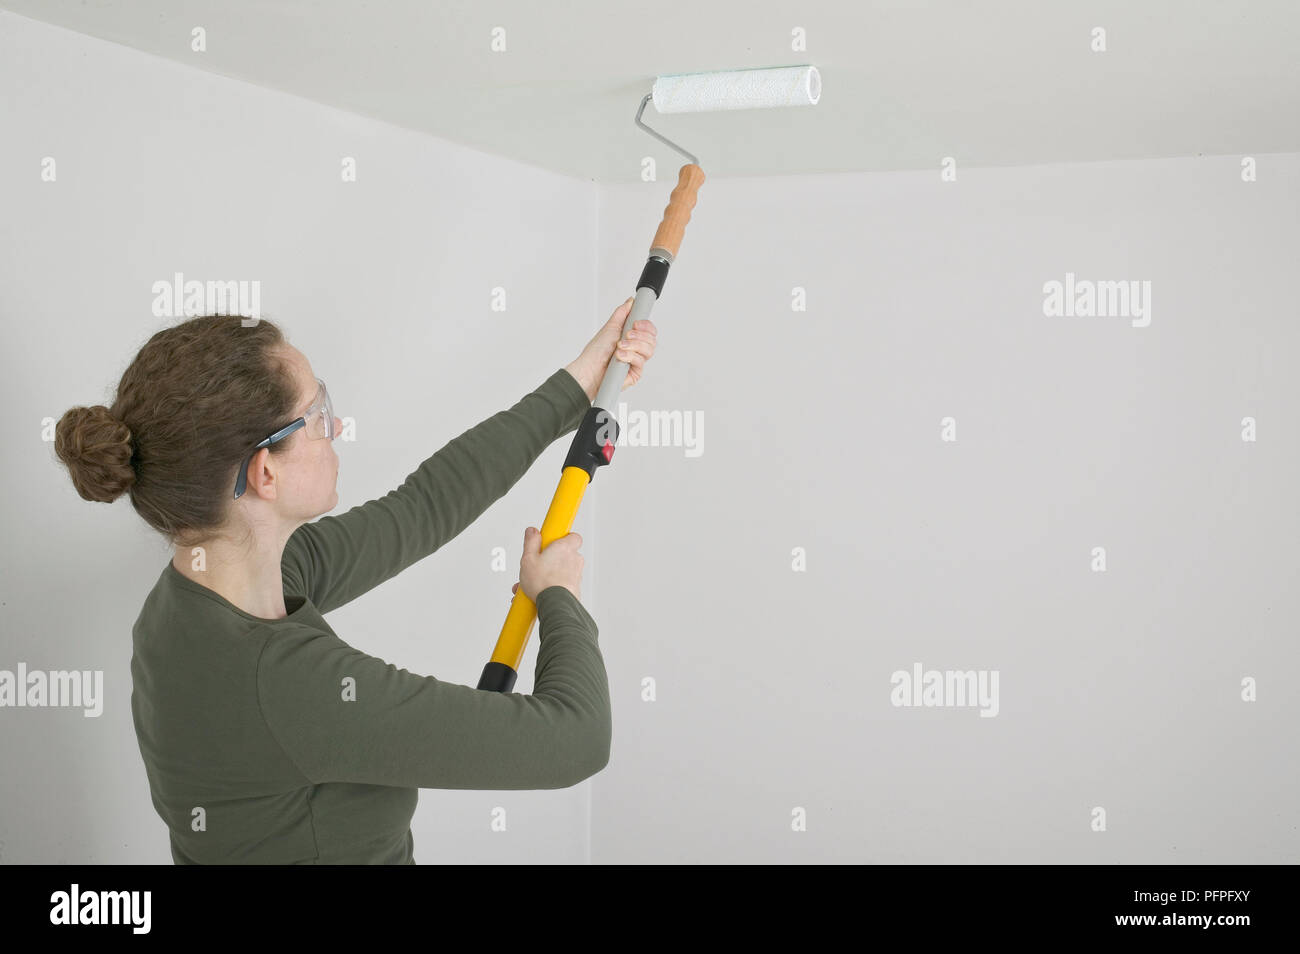 Woman Painting Ceiling With Roller Stock Photo 216239715